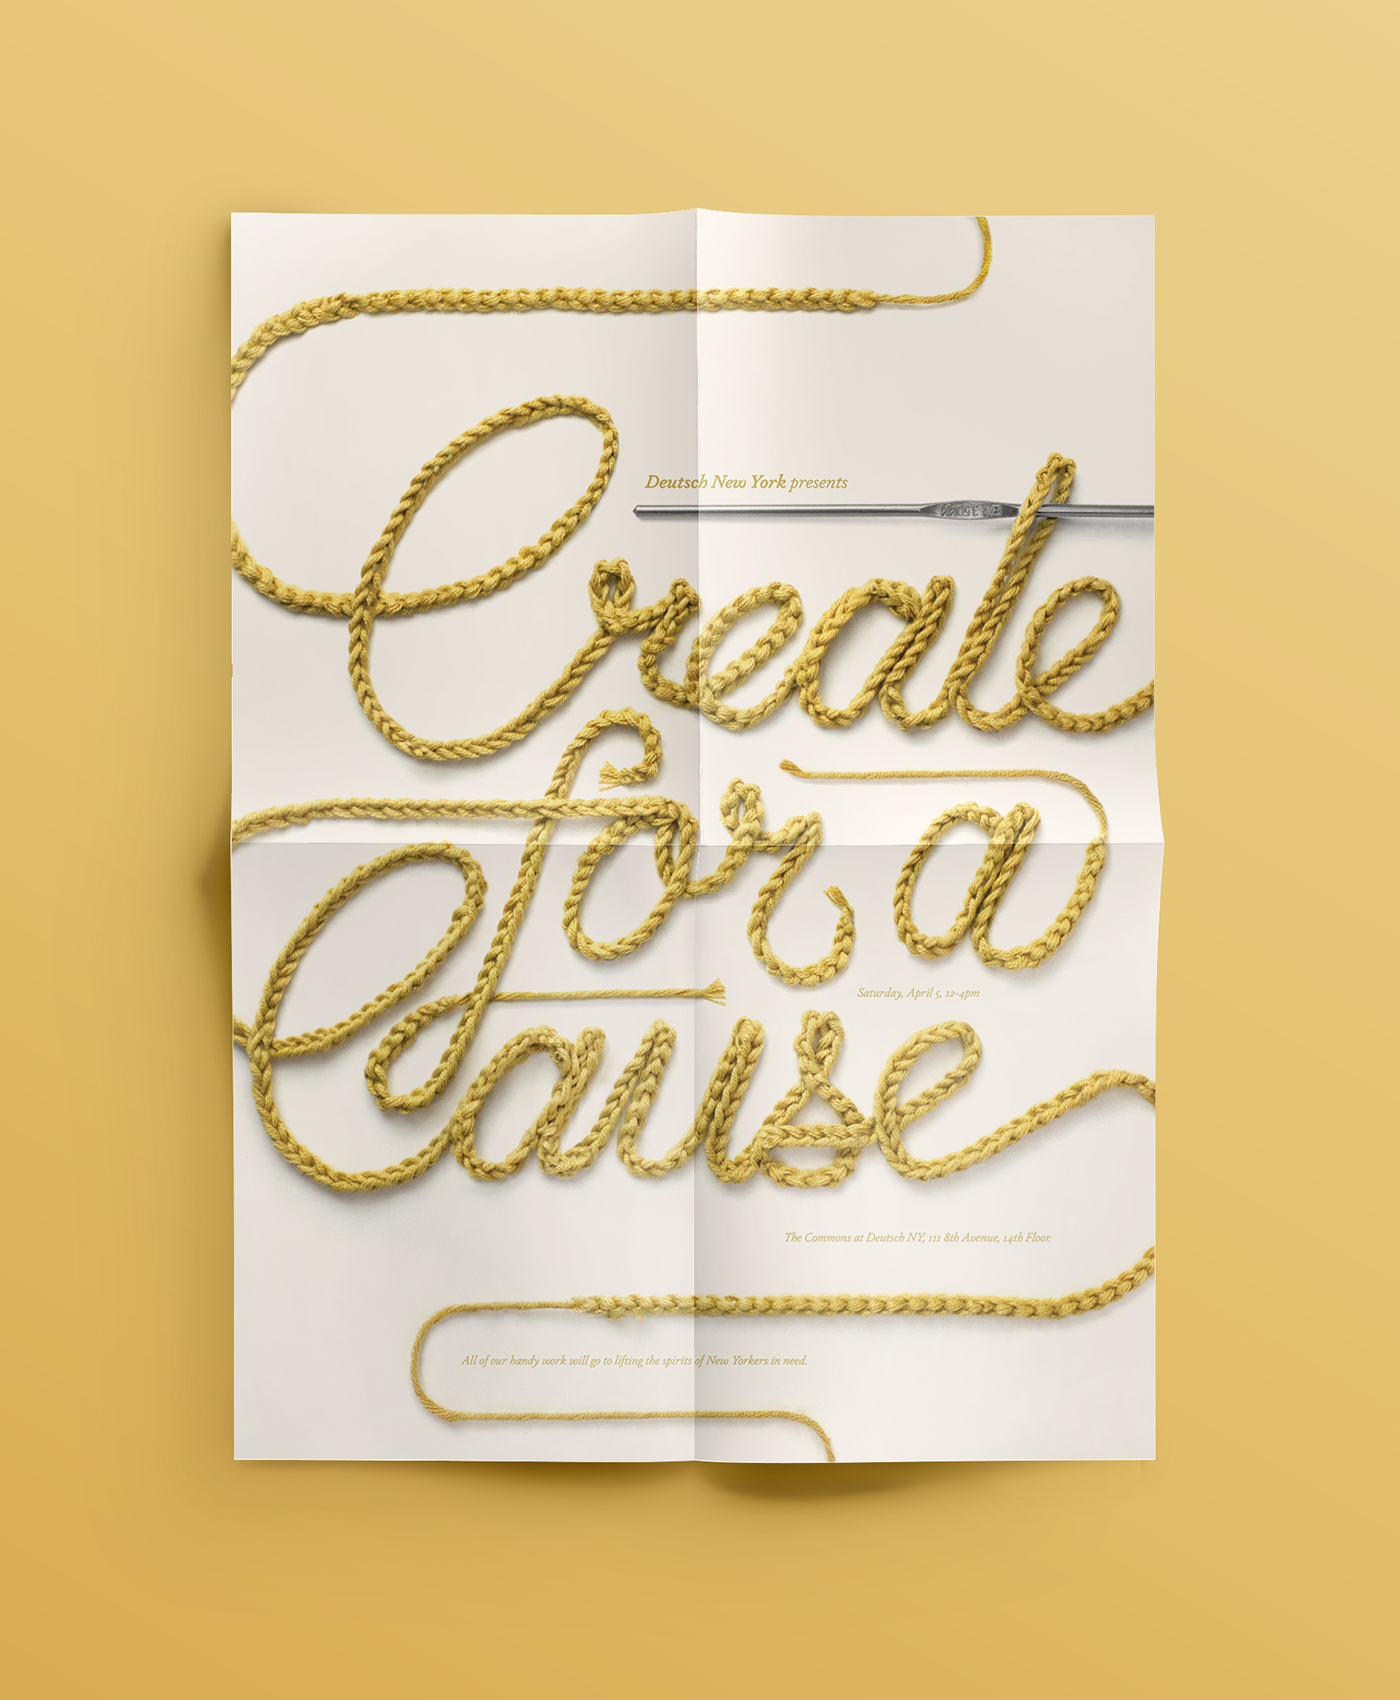 type typography   design posters lettering graphic design  Juan Carlos Pagan 3D print editorial